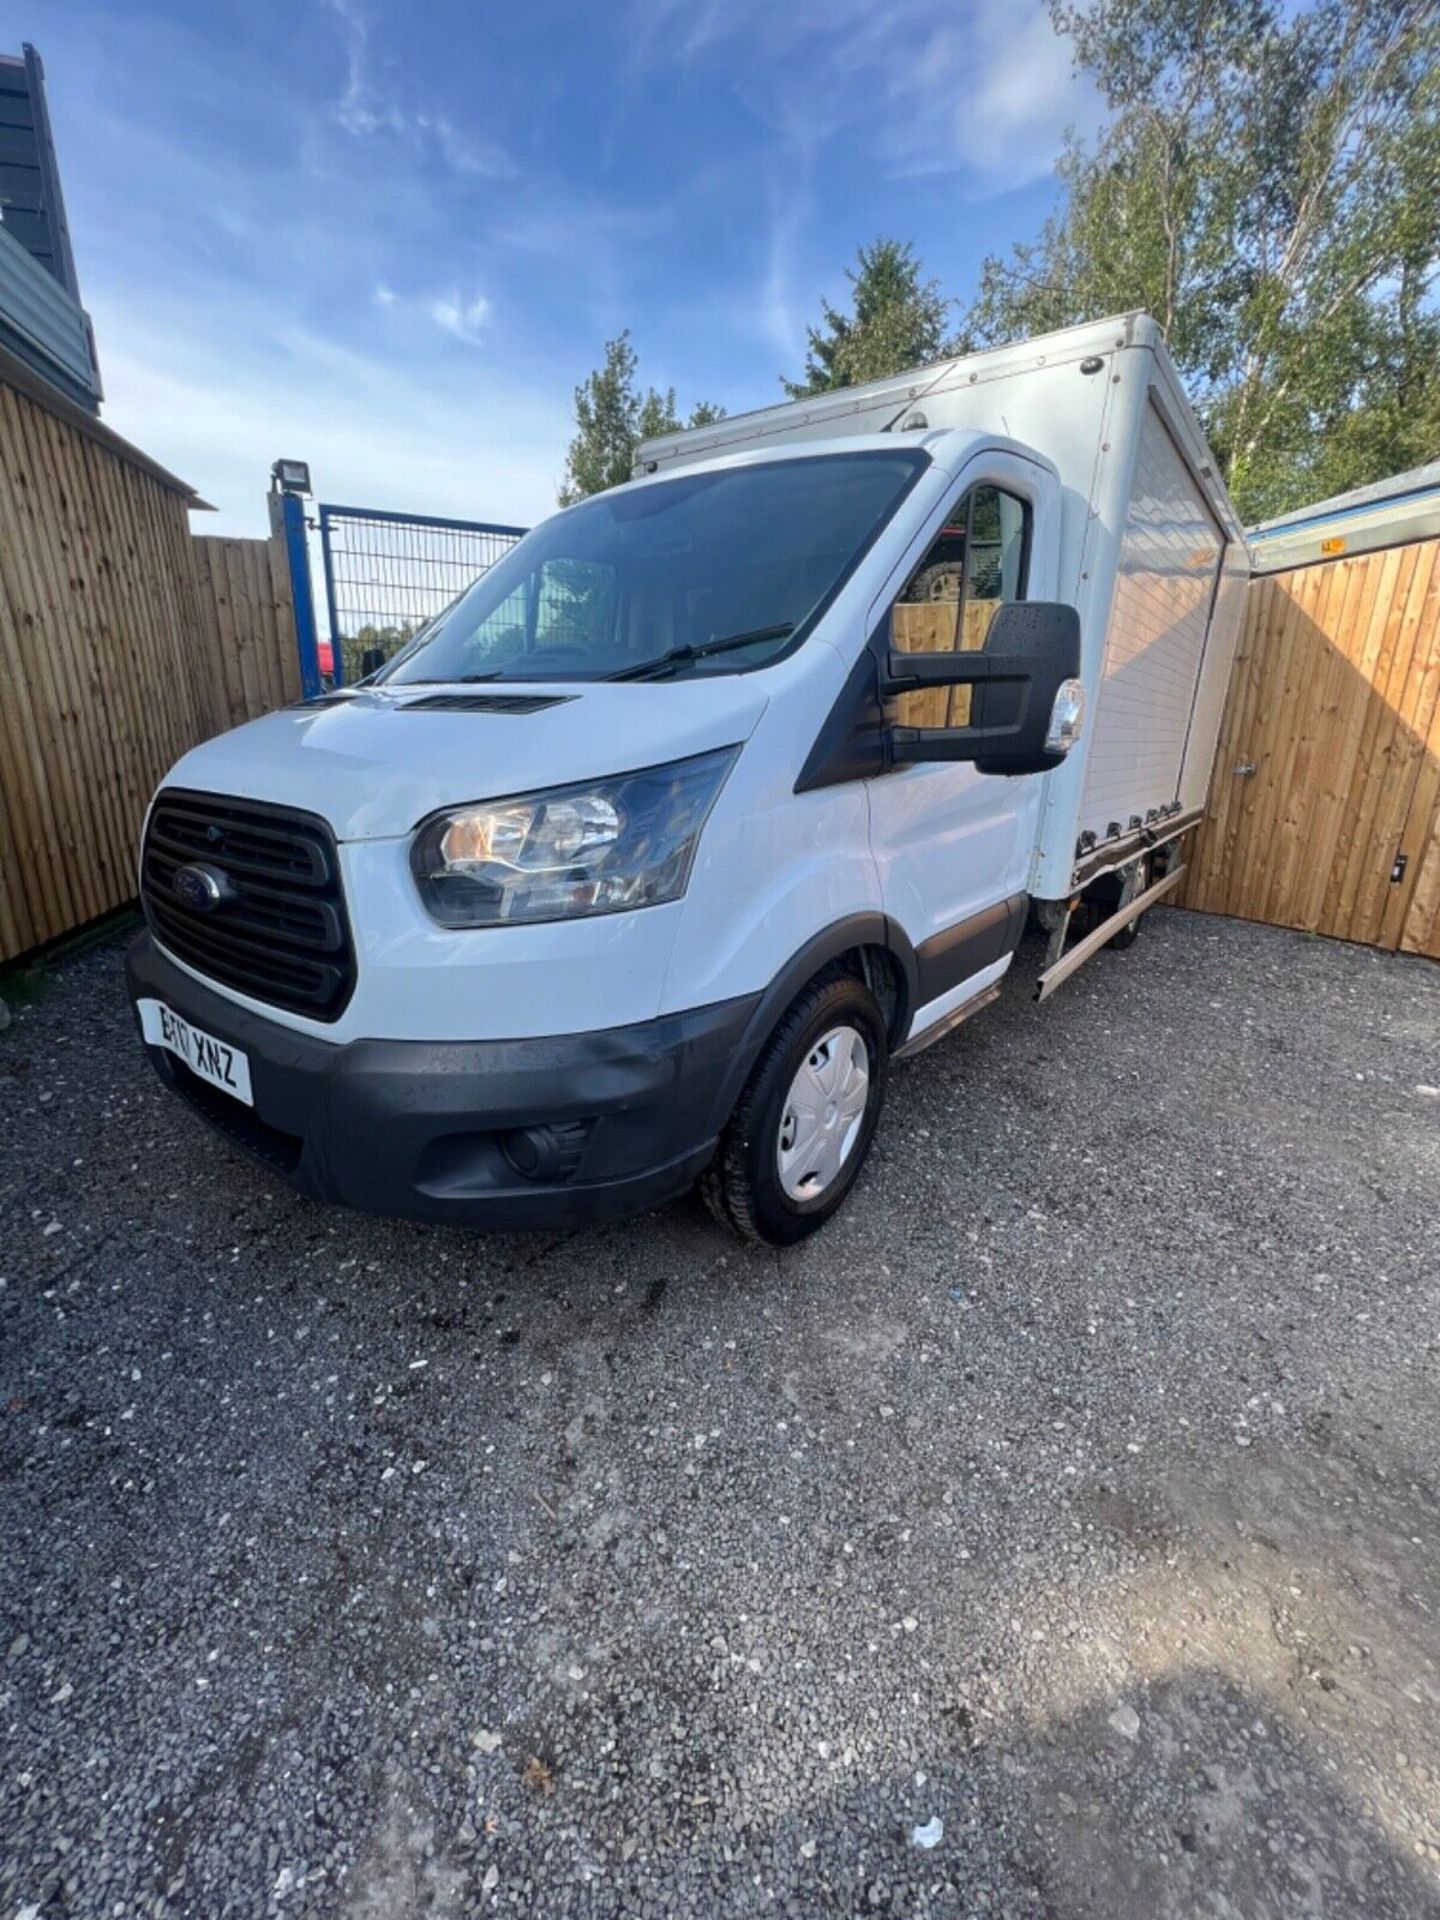 FORD TRANSIT BOX VAN 2017 LUTON EURO6 LWB 6 SPEED MANUAL 1COMPANY OWNER FROM NEW - Image 2 of 15